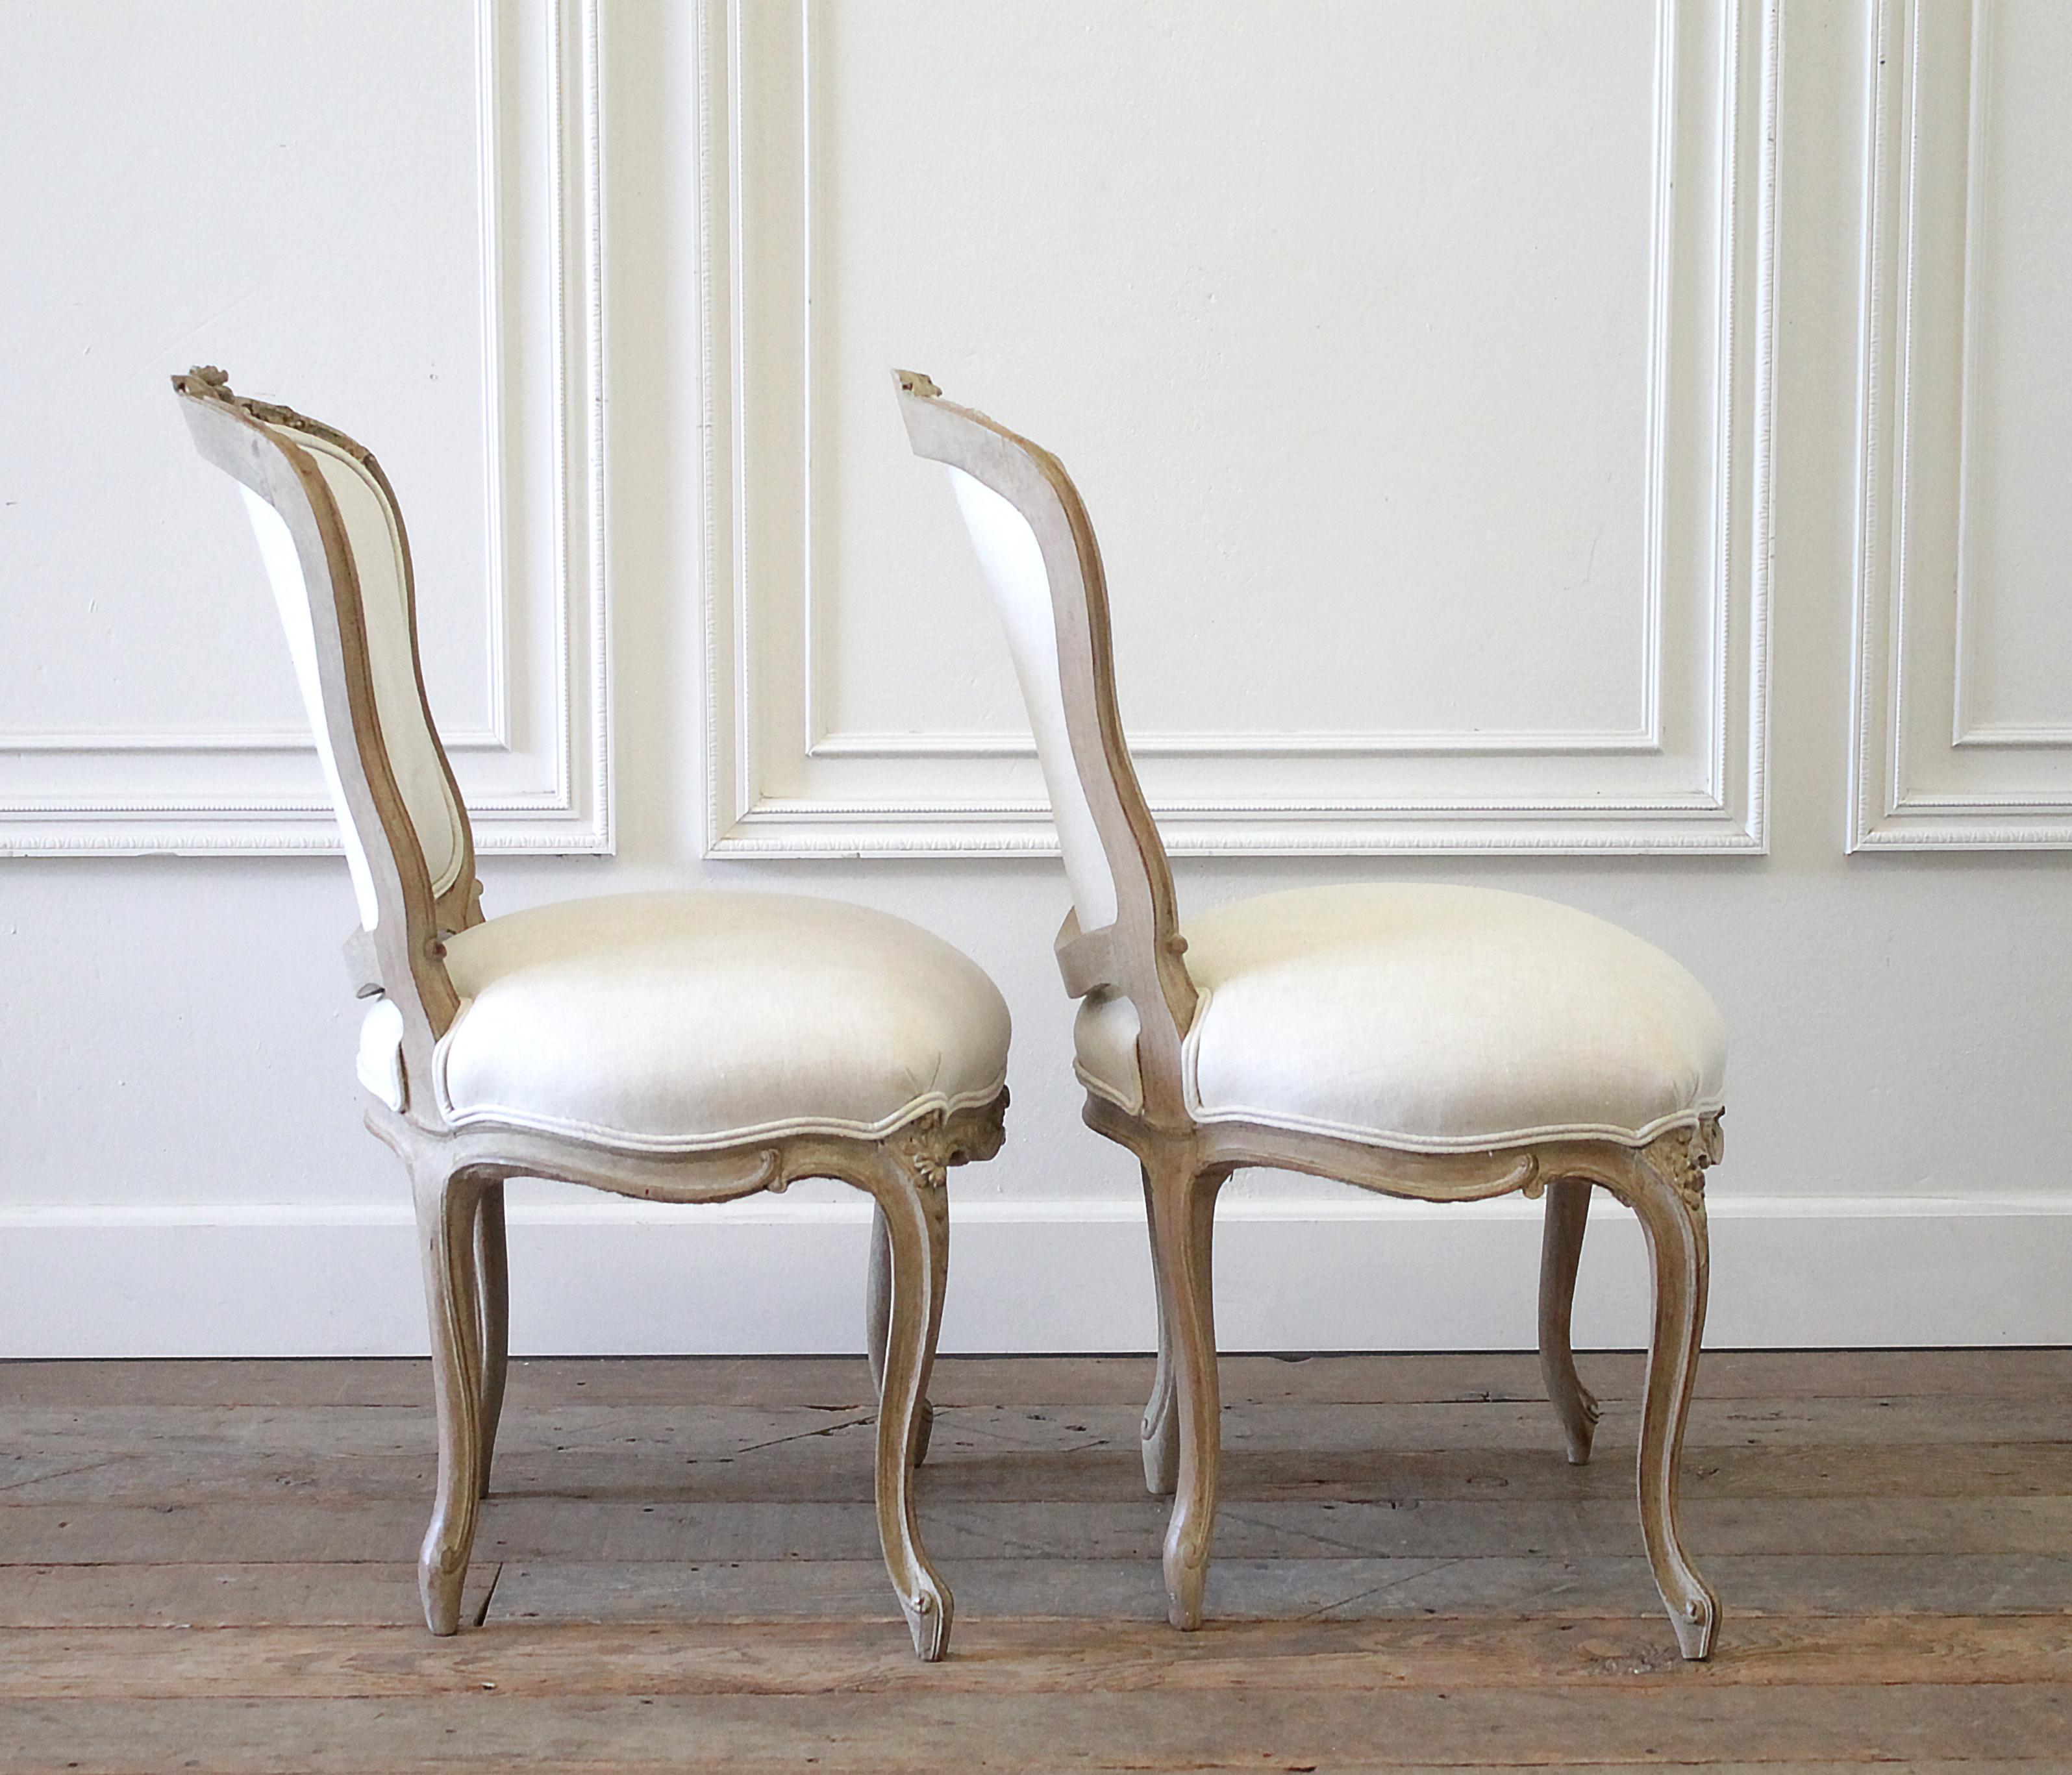 20th century Louis XV style carved wood and linen upholstered chairs
We have only these two available and they are sold individually. Original wood finish, with antique grey tones. Upholstered in 100% pure Belgian linen, in a light oatmeal